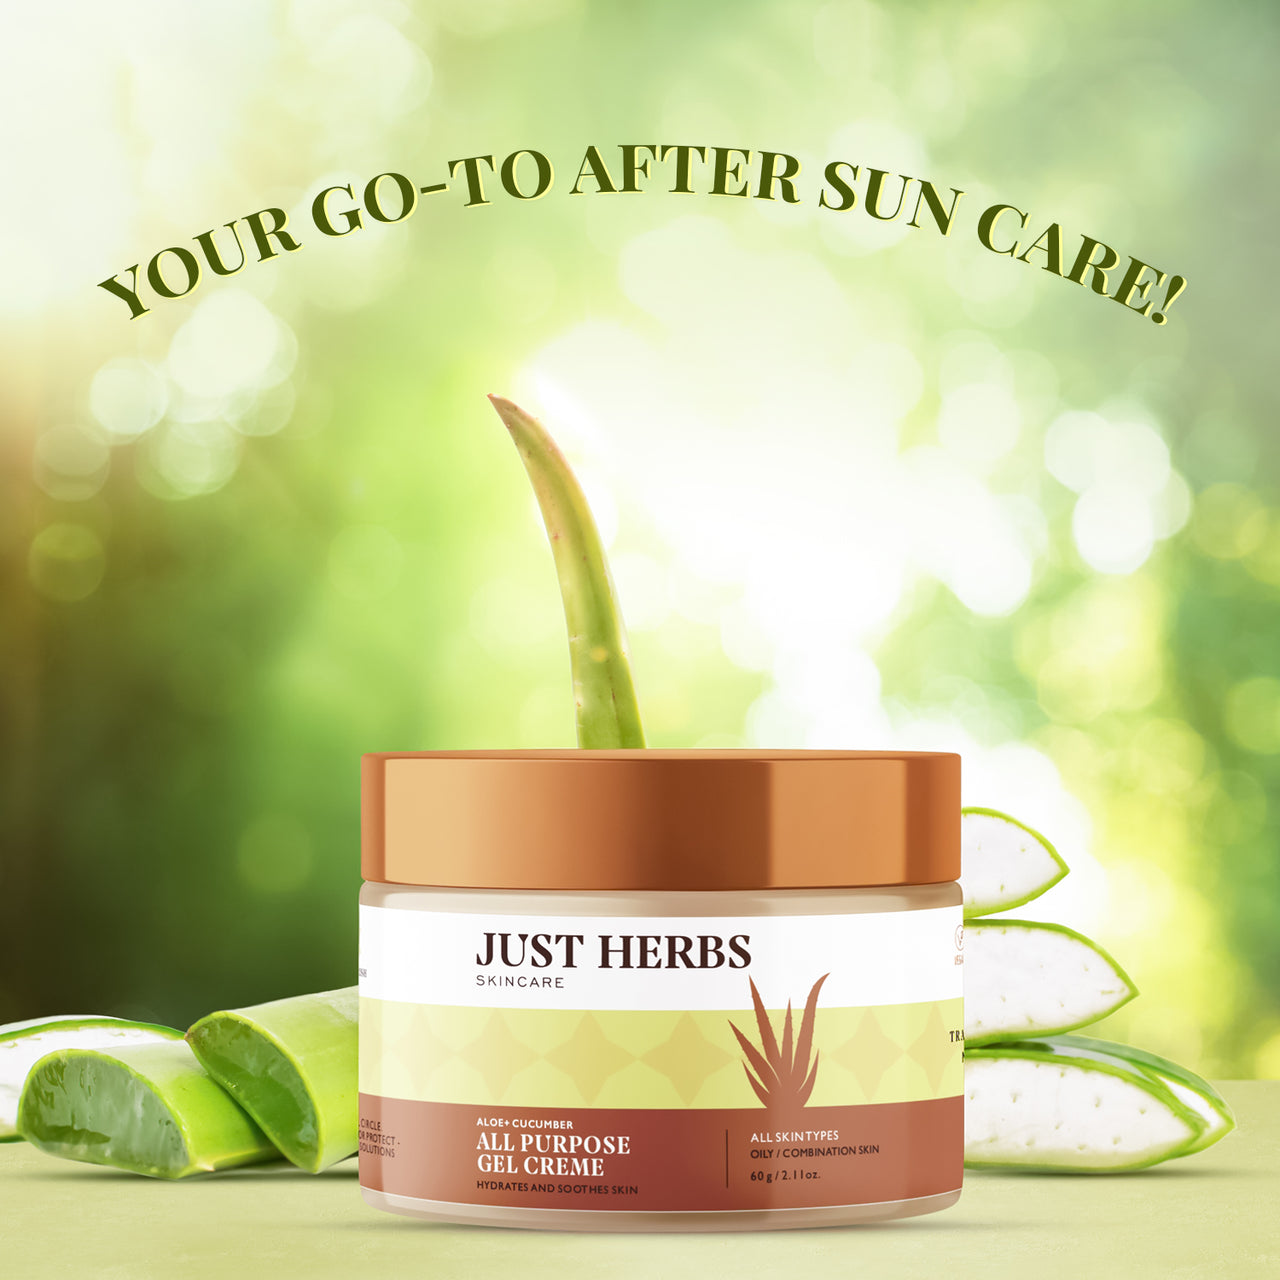 All Purpose Gel Creme with Aloe Vera and Cucumber